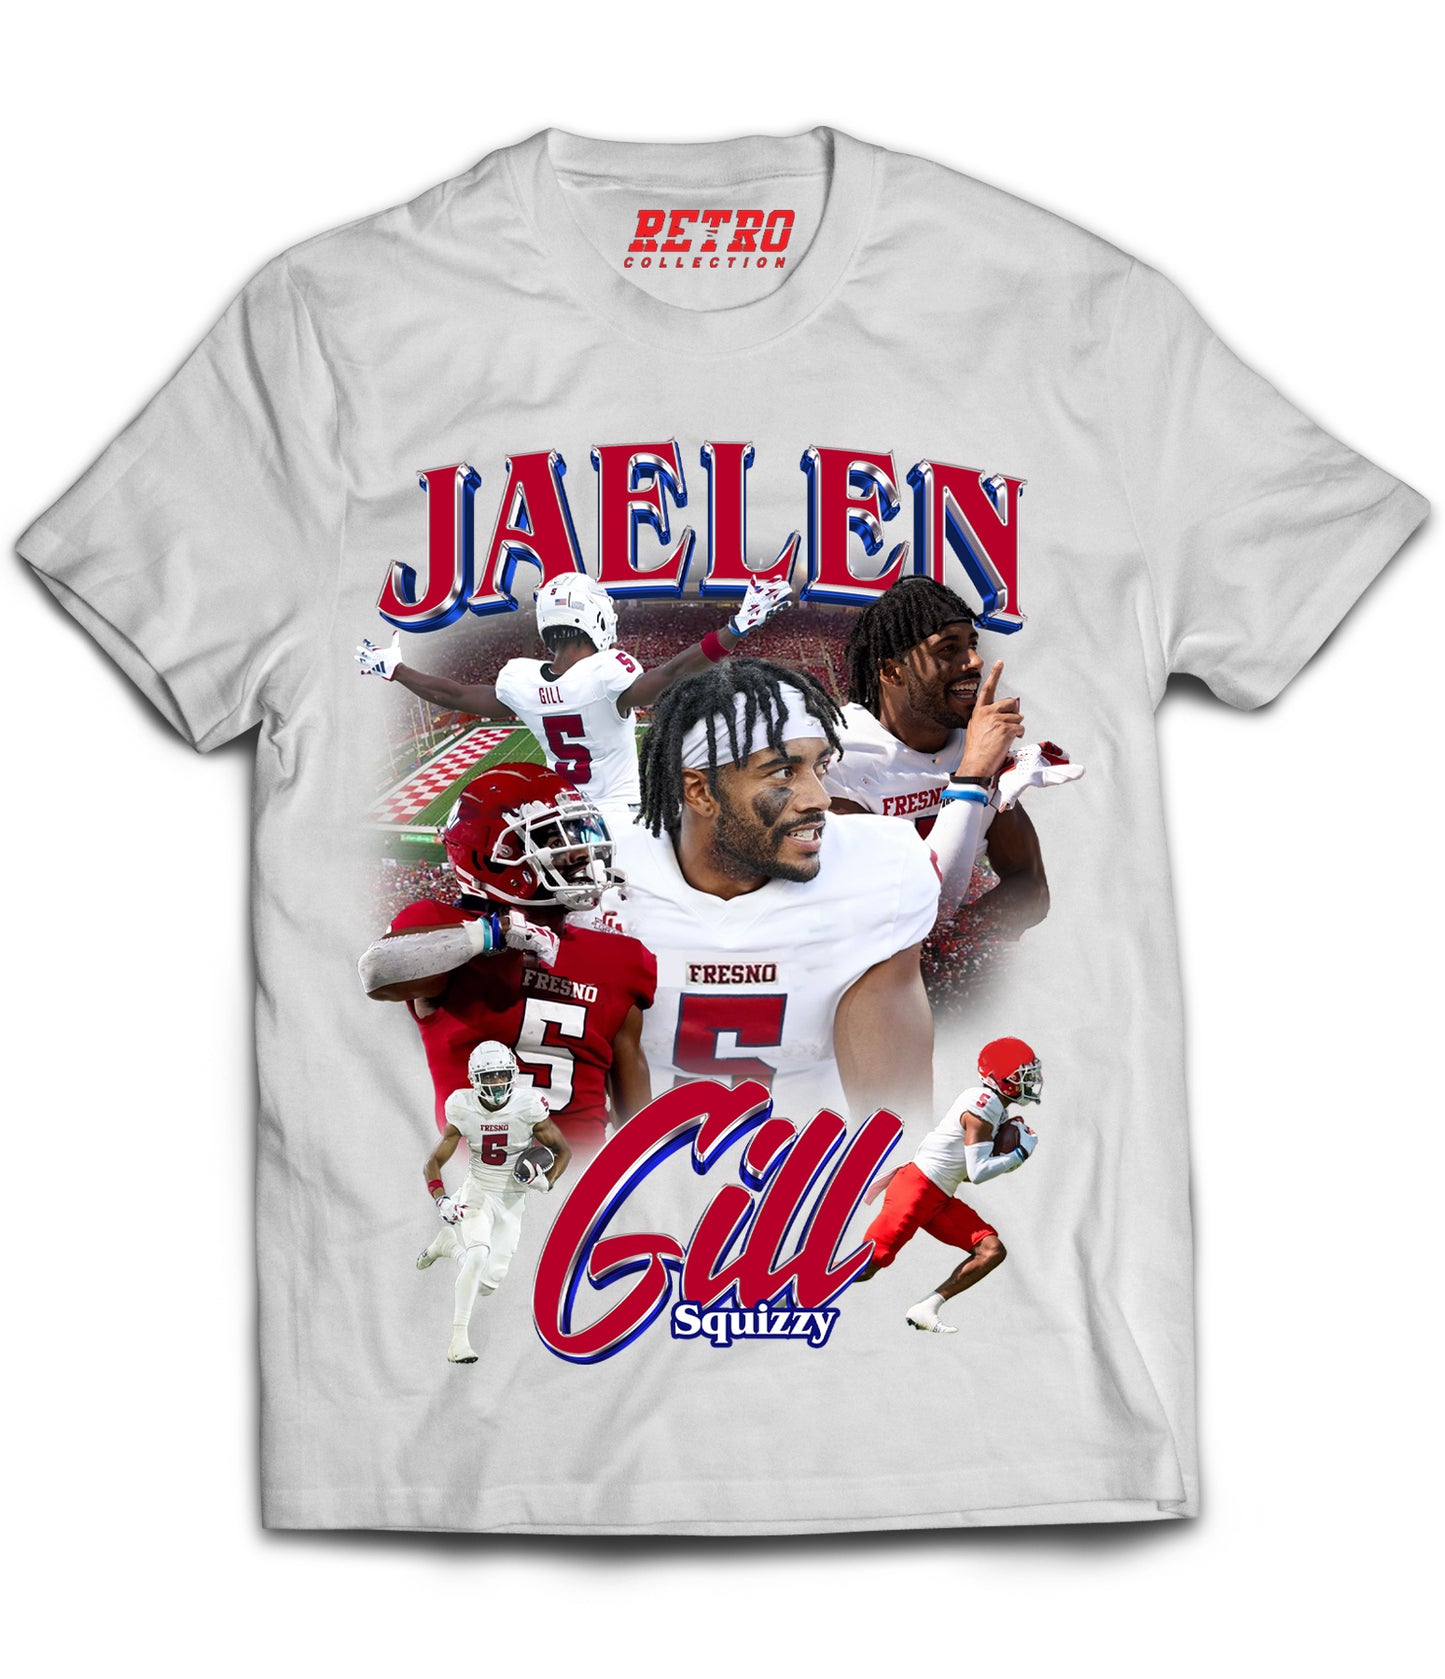 Jaelen "Squizzy" Gill Tribute Shirt *LIMITED EDITION* (Black, Red, White)